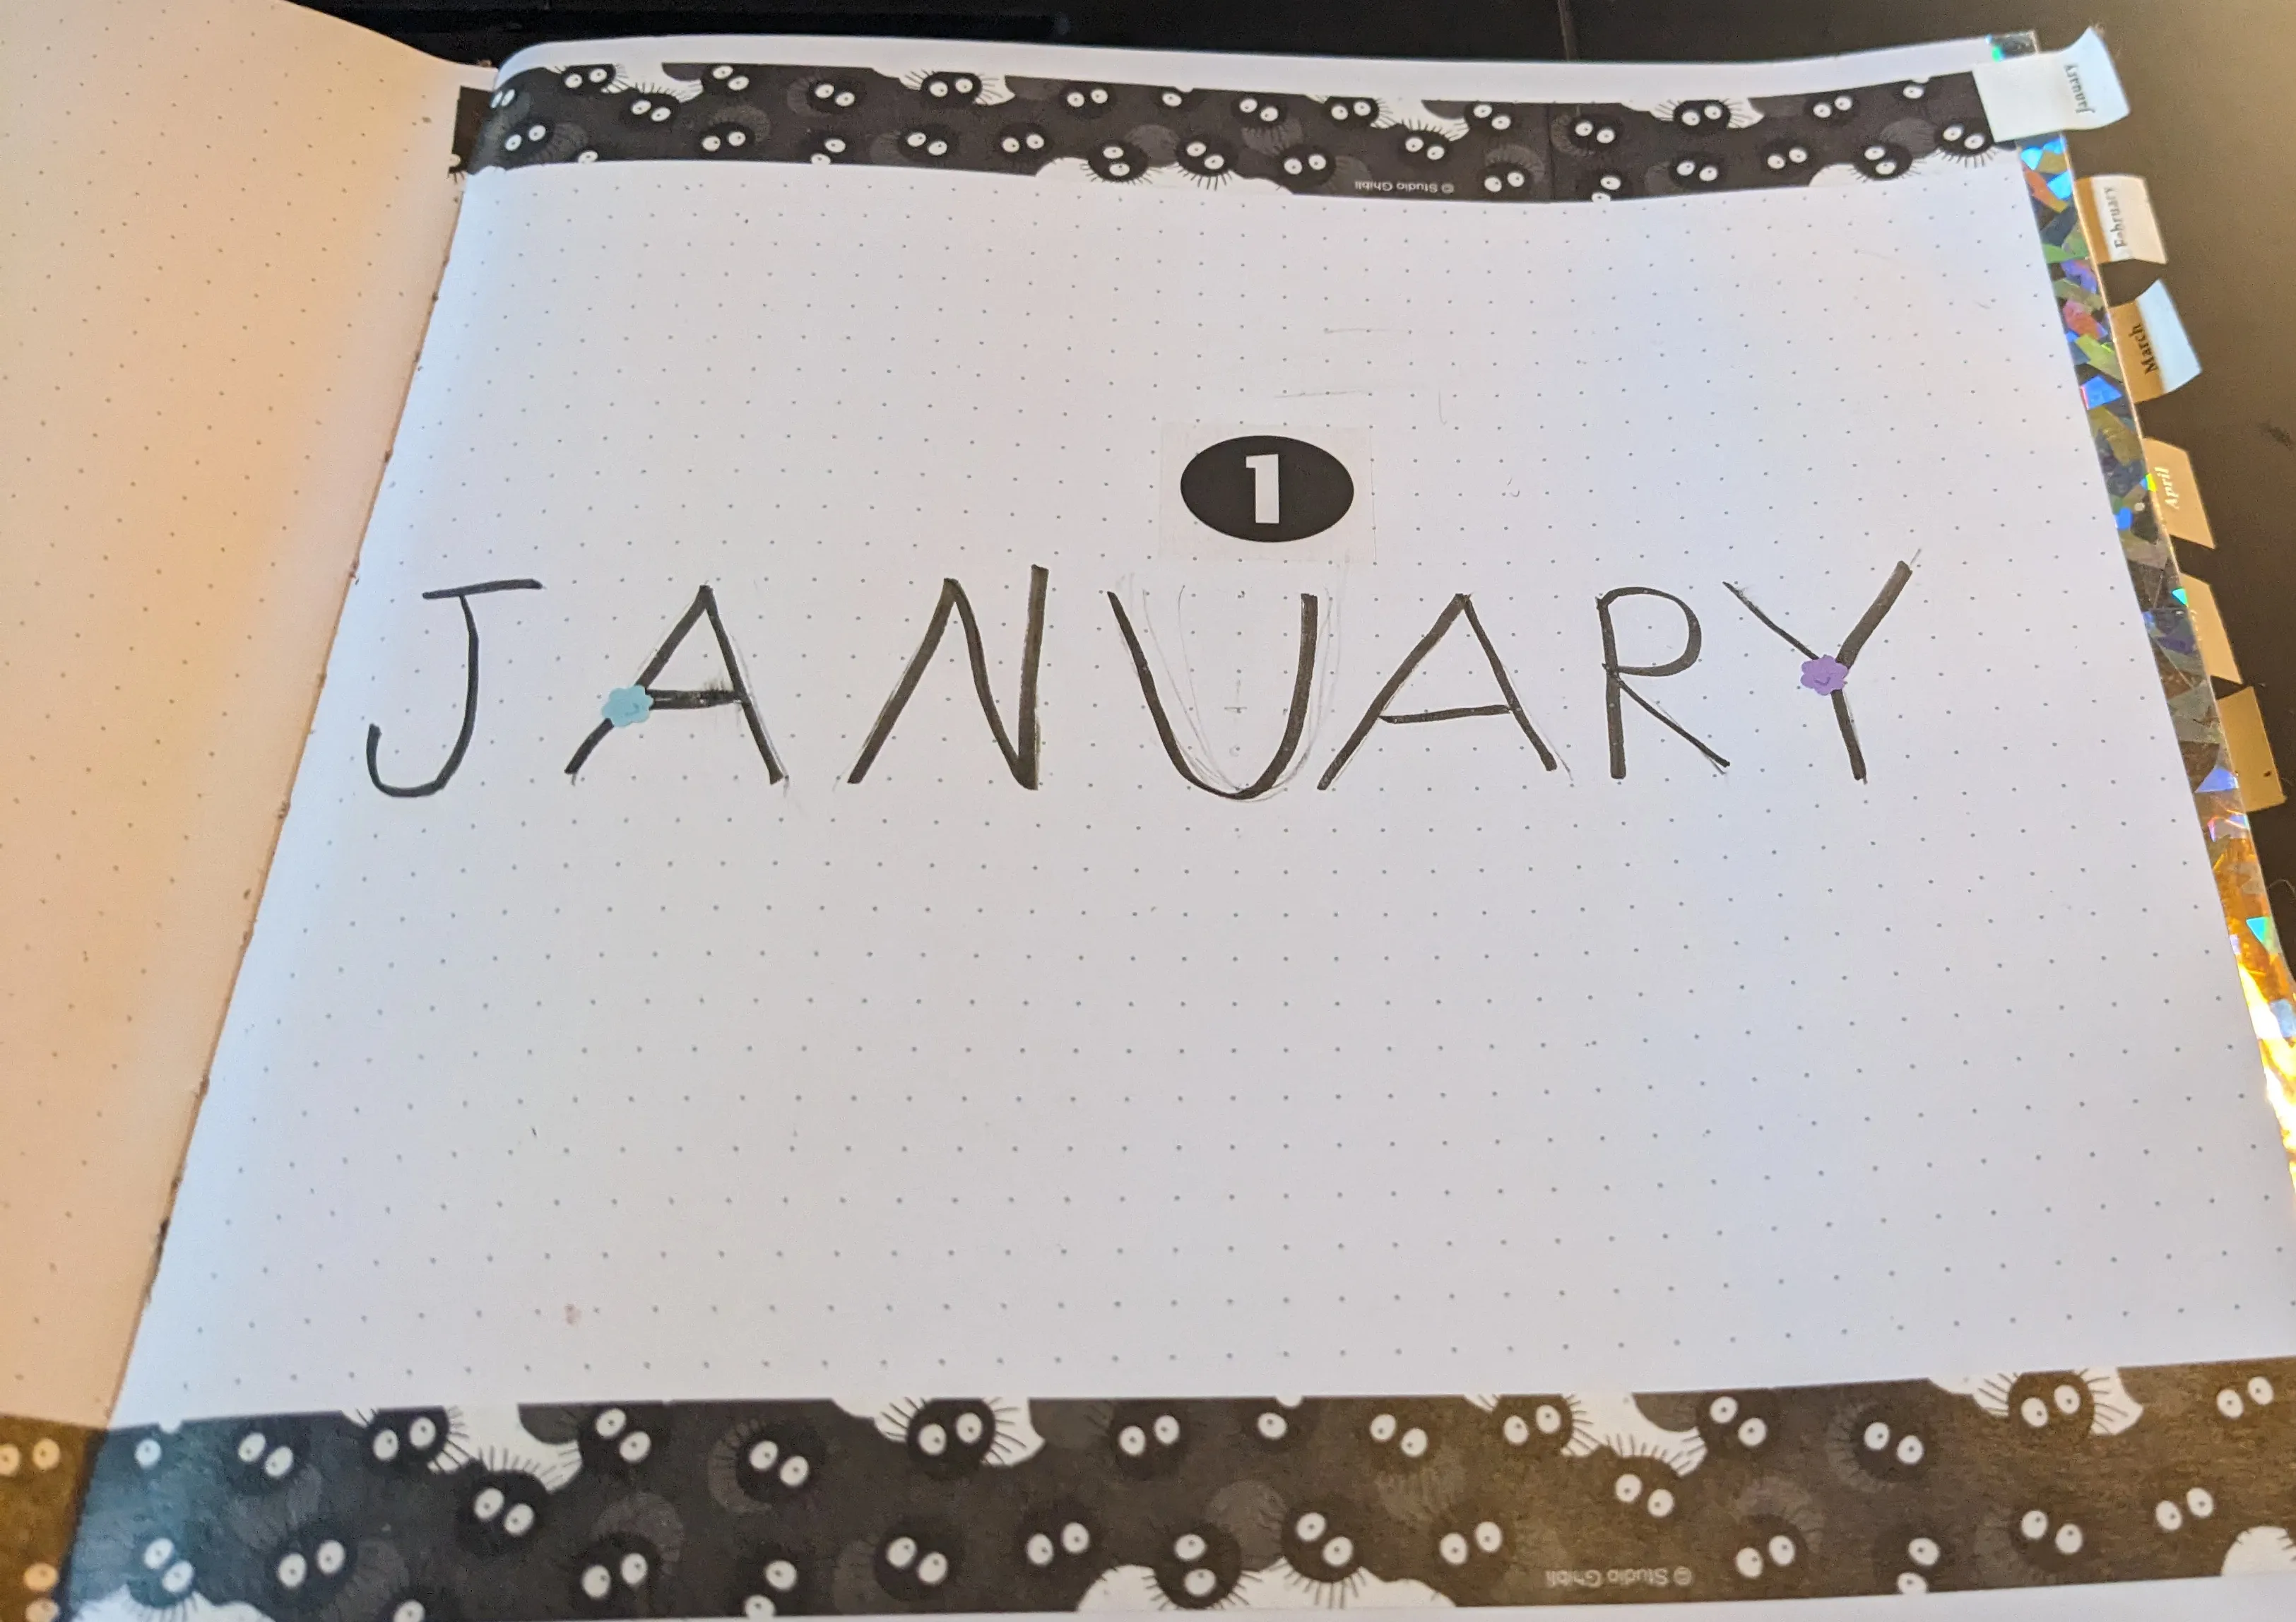 The page for each month